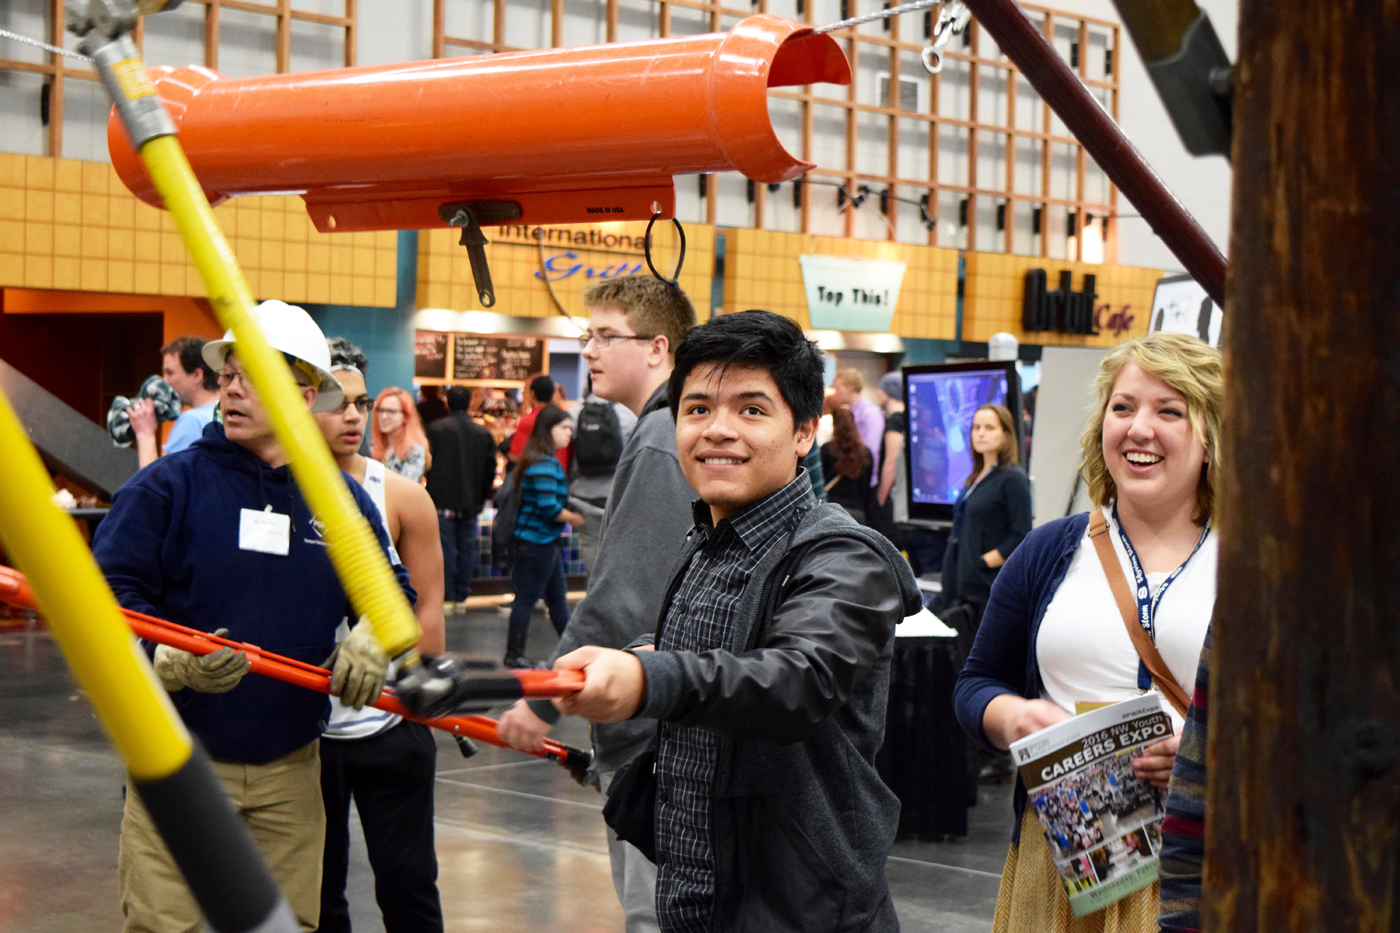 NW Youth Careers Expo 2016: PGE/PacifiCorp exhibit 